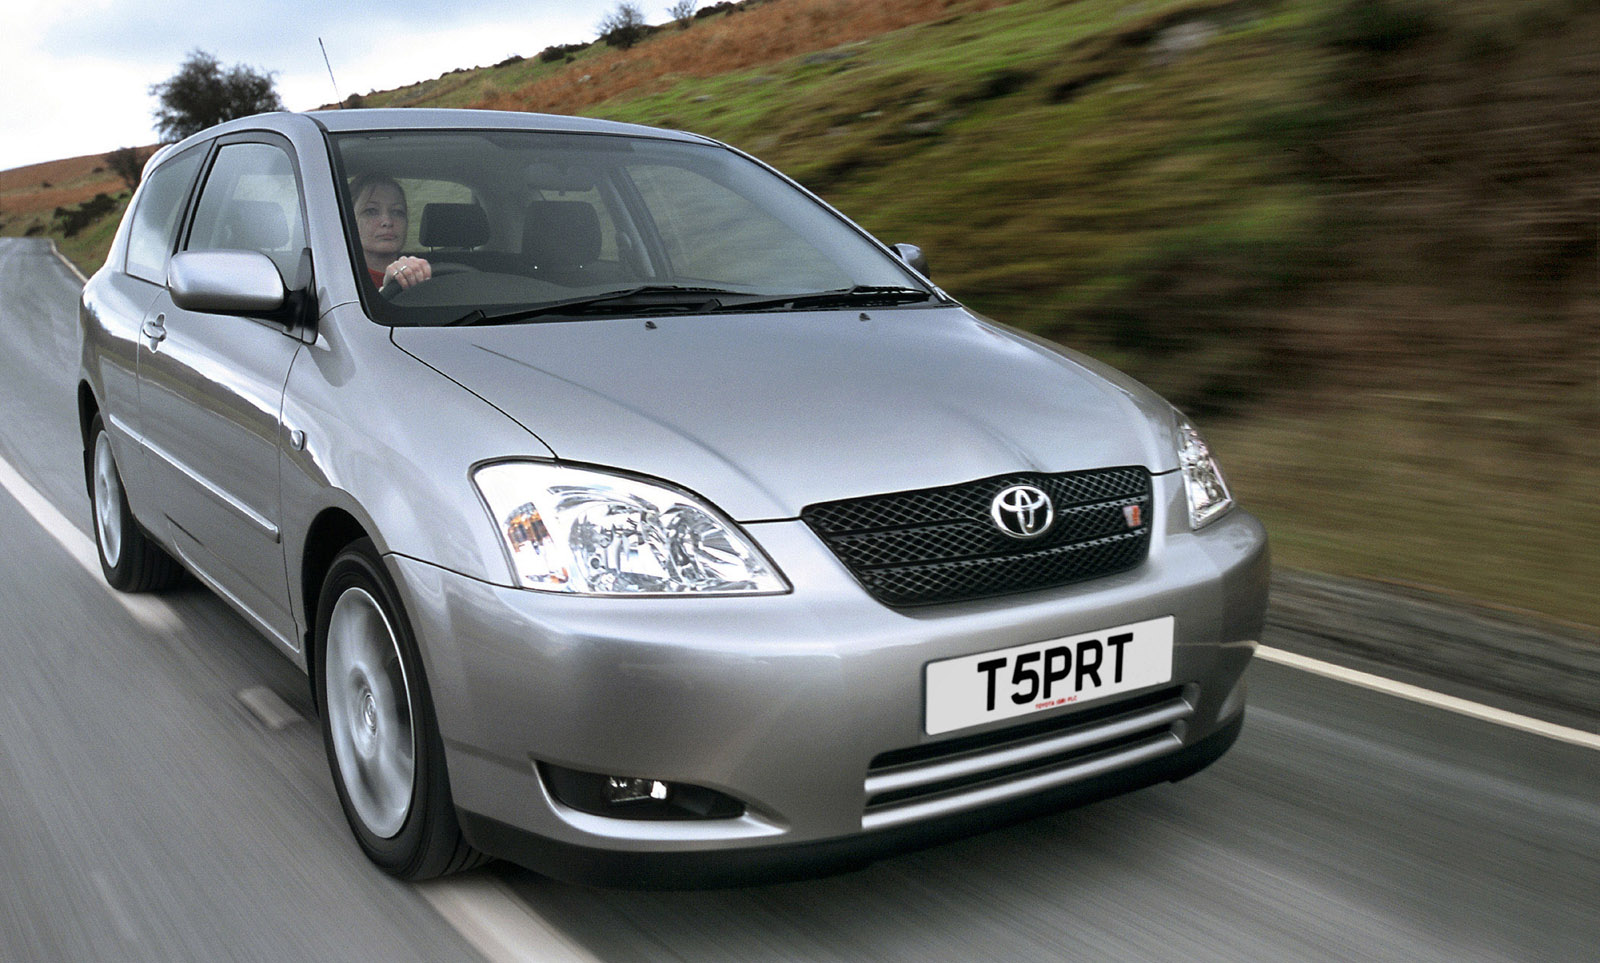 2002 Toyota Corolla T Sport picture - Cars on the net